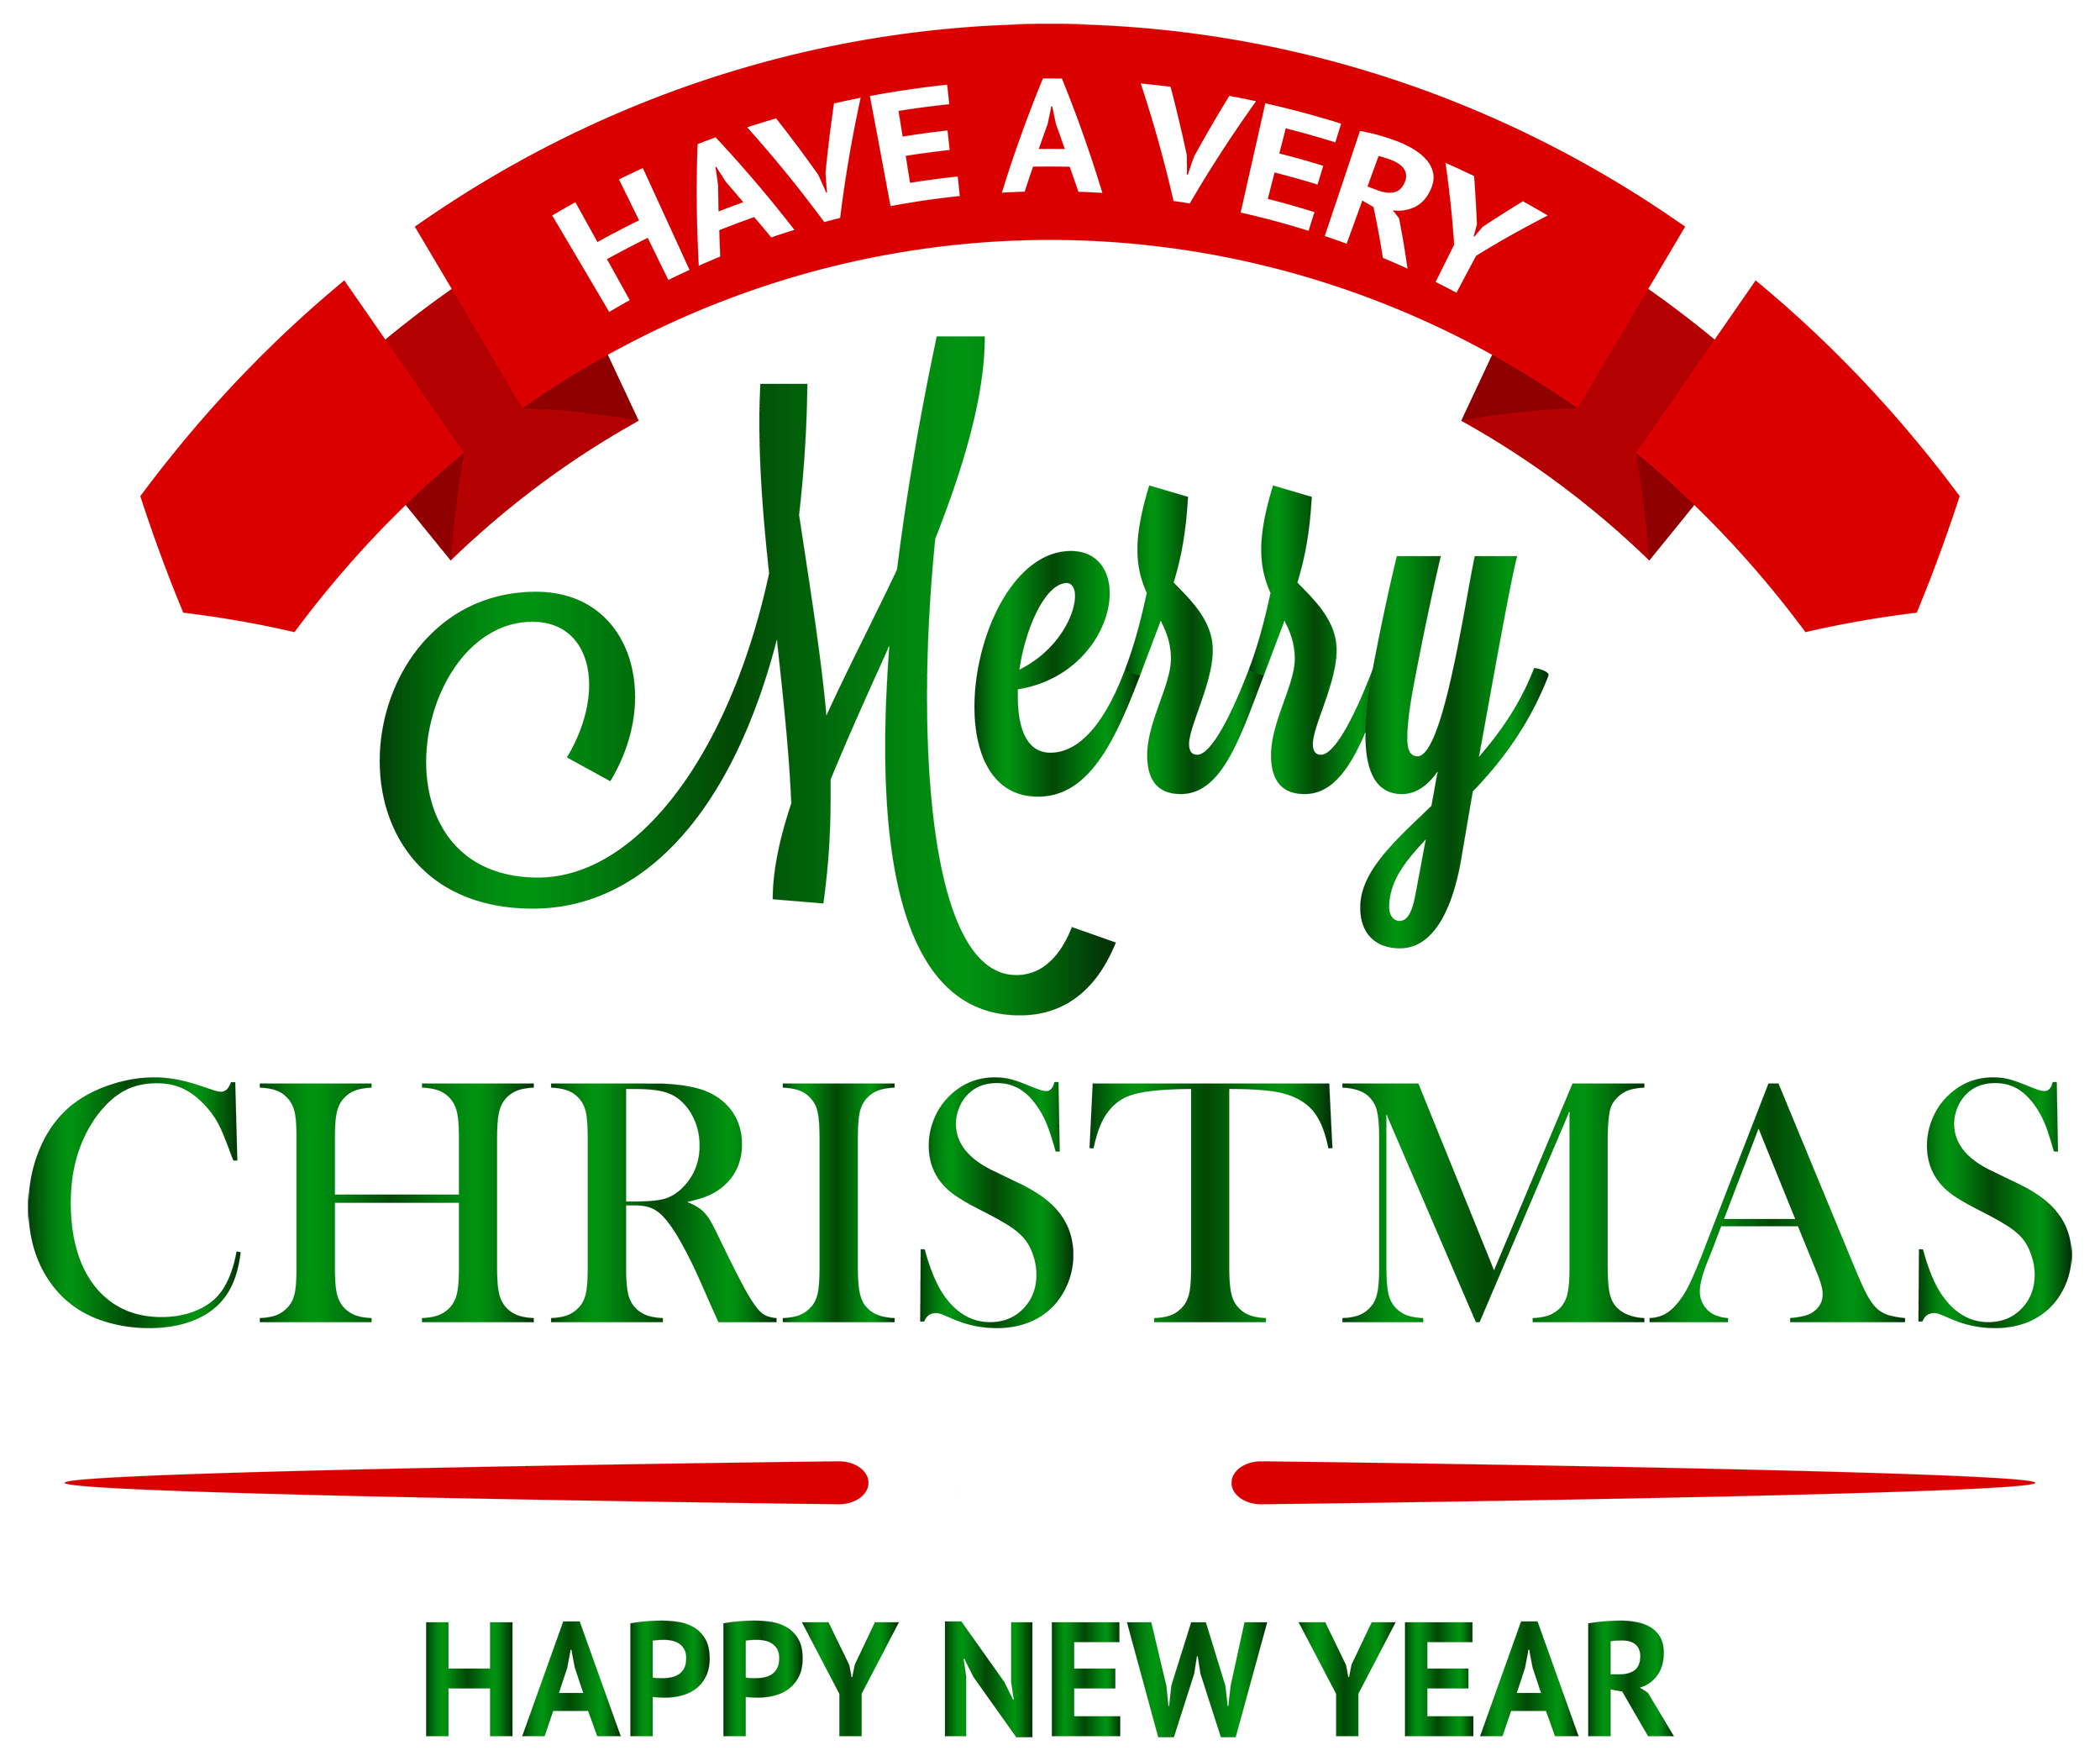 Christmas Year Download HD PNG Image